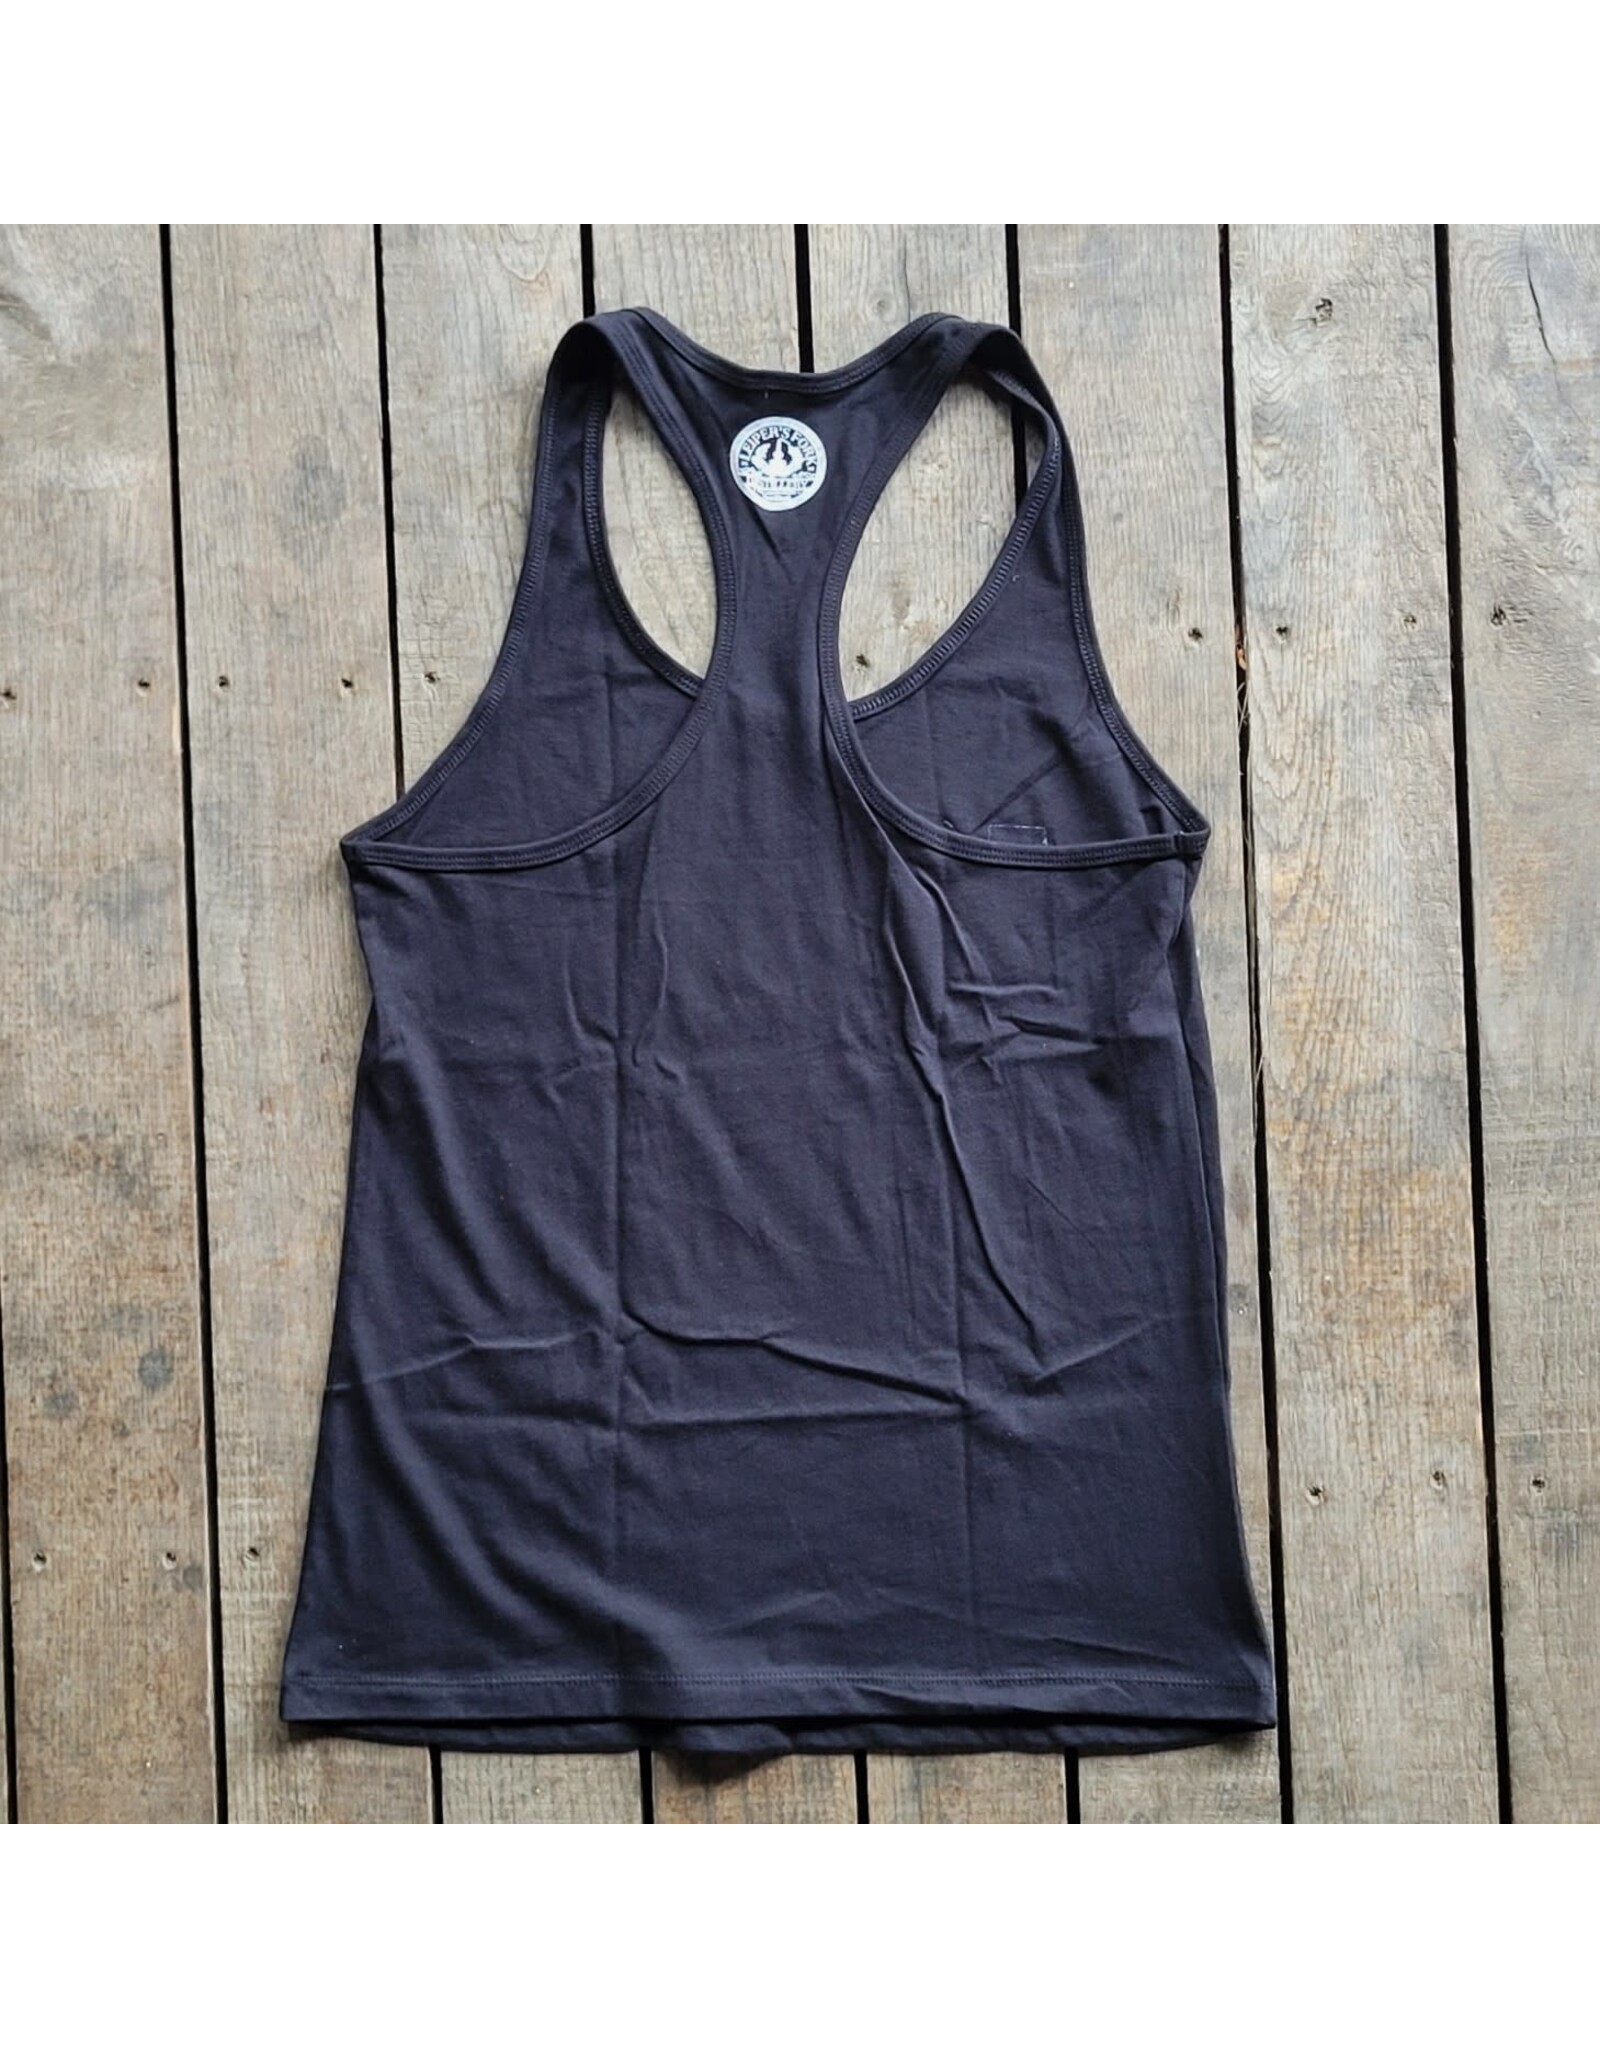 Whiskey Business Tank Top